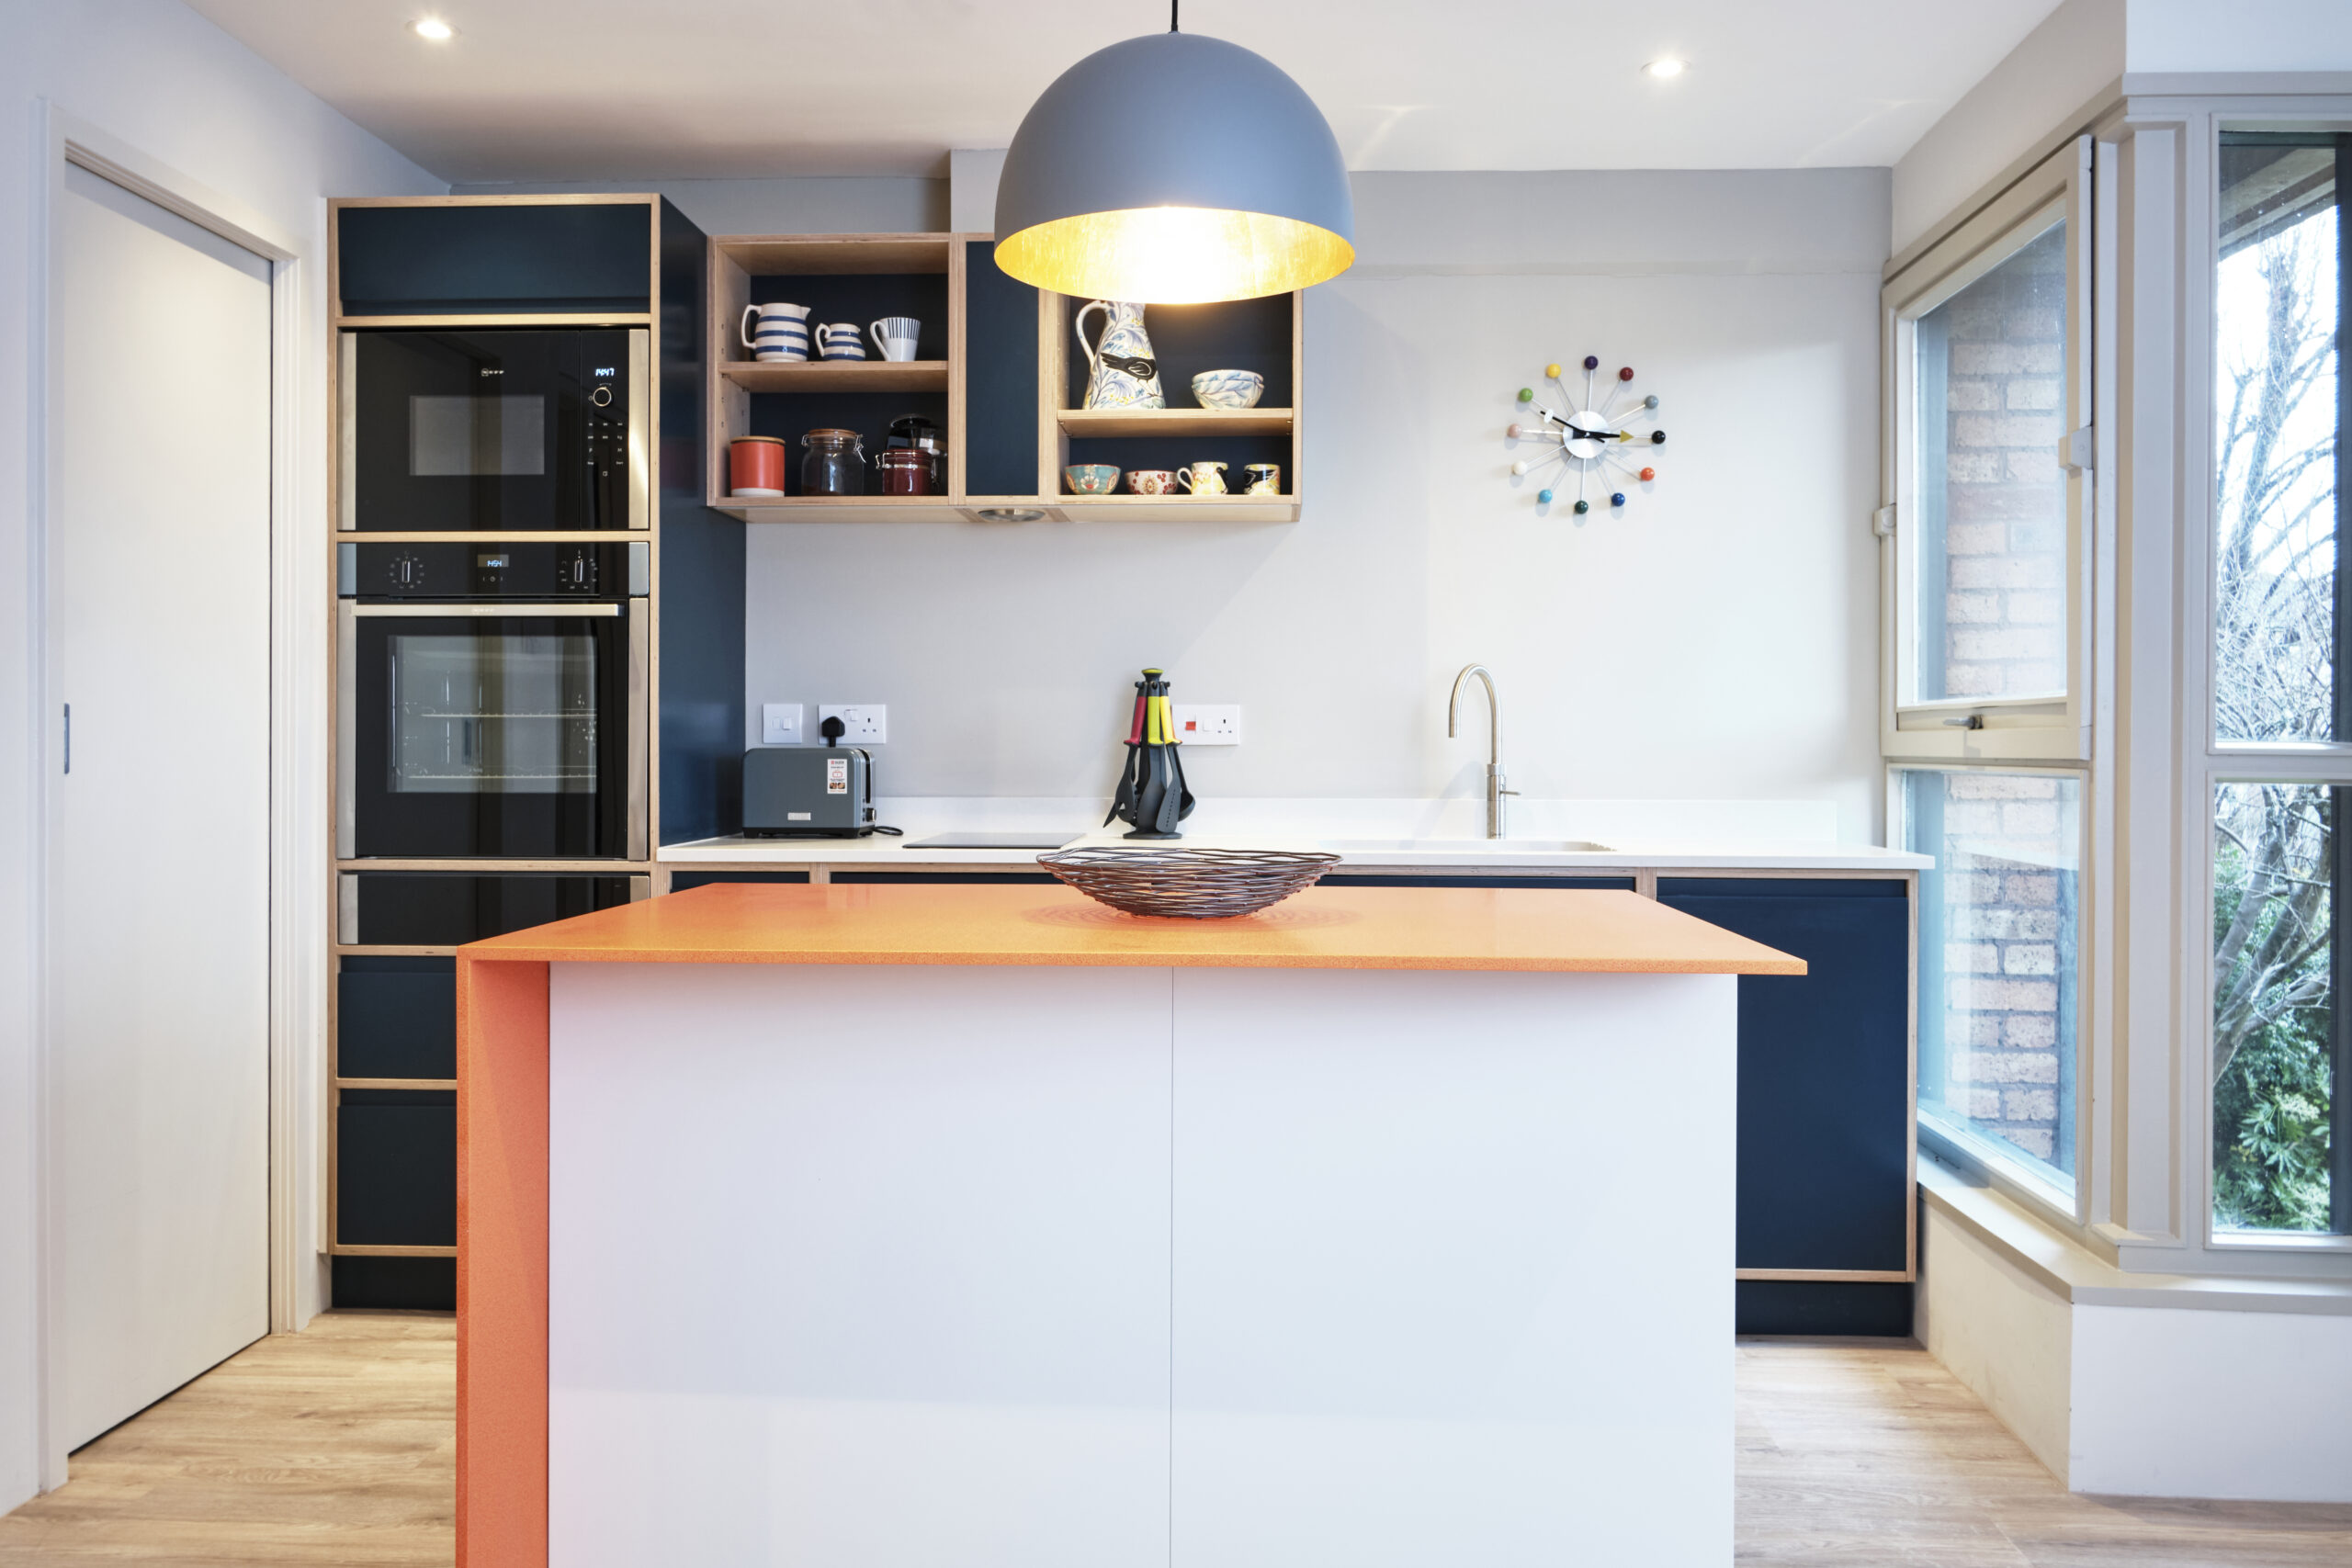 Contemporary Ply Edge Kitchen in Blue, Grey and Orange